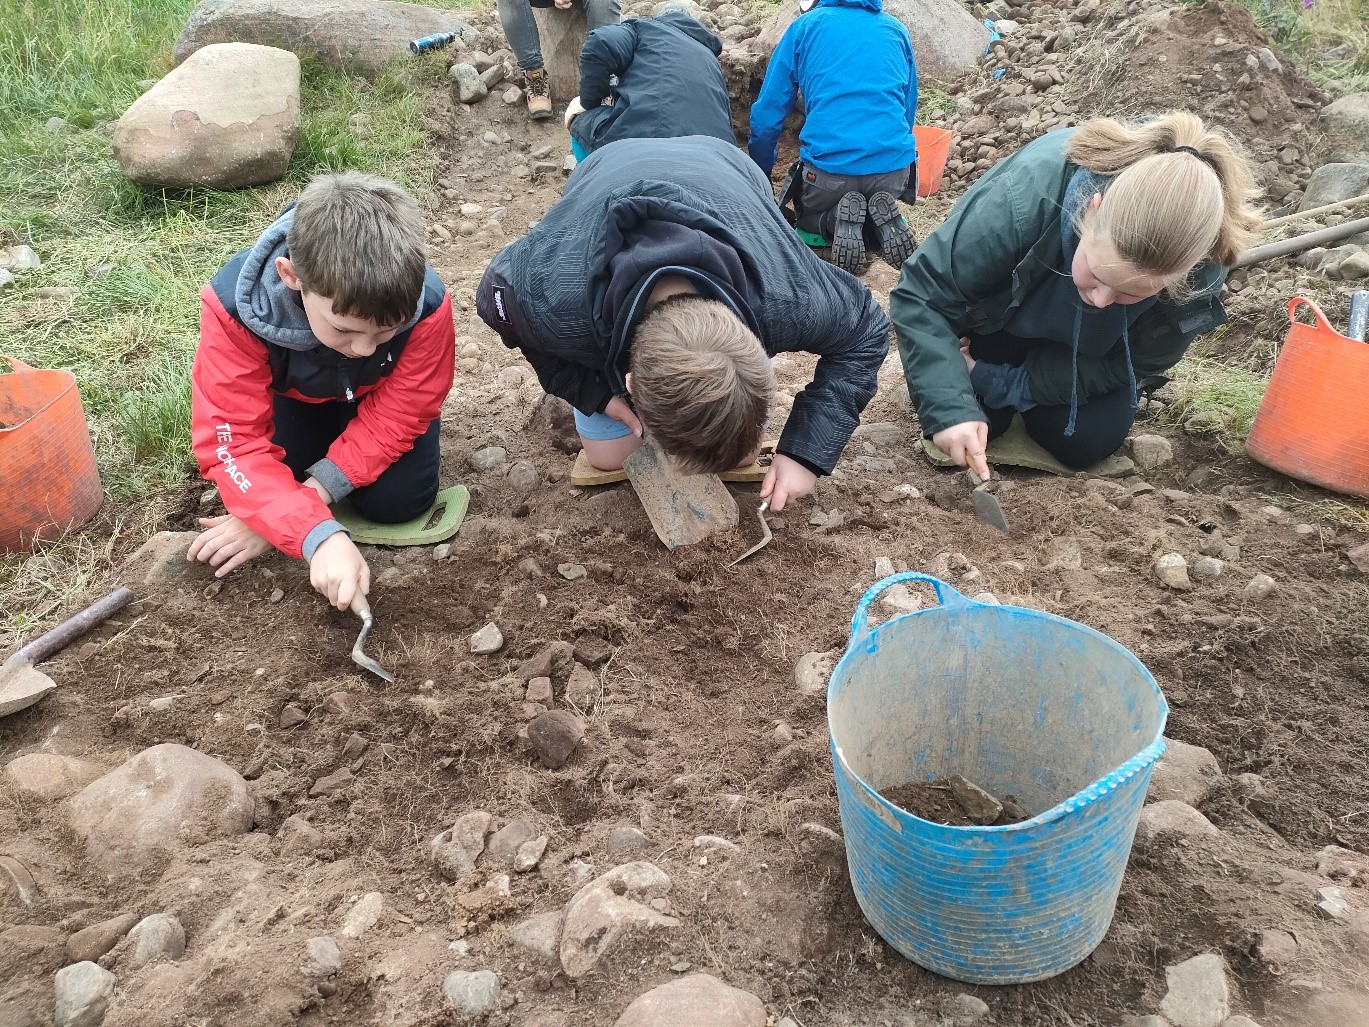 Students are kneeling on the ground. They are holding tools and scraping the ground. There is a bucket in the foreground with soil and rocks in. 2 students are also kneeling in the background with their backs to the camera. 